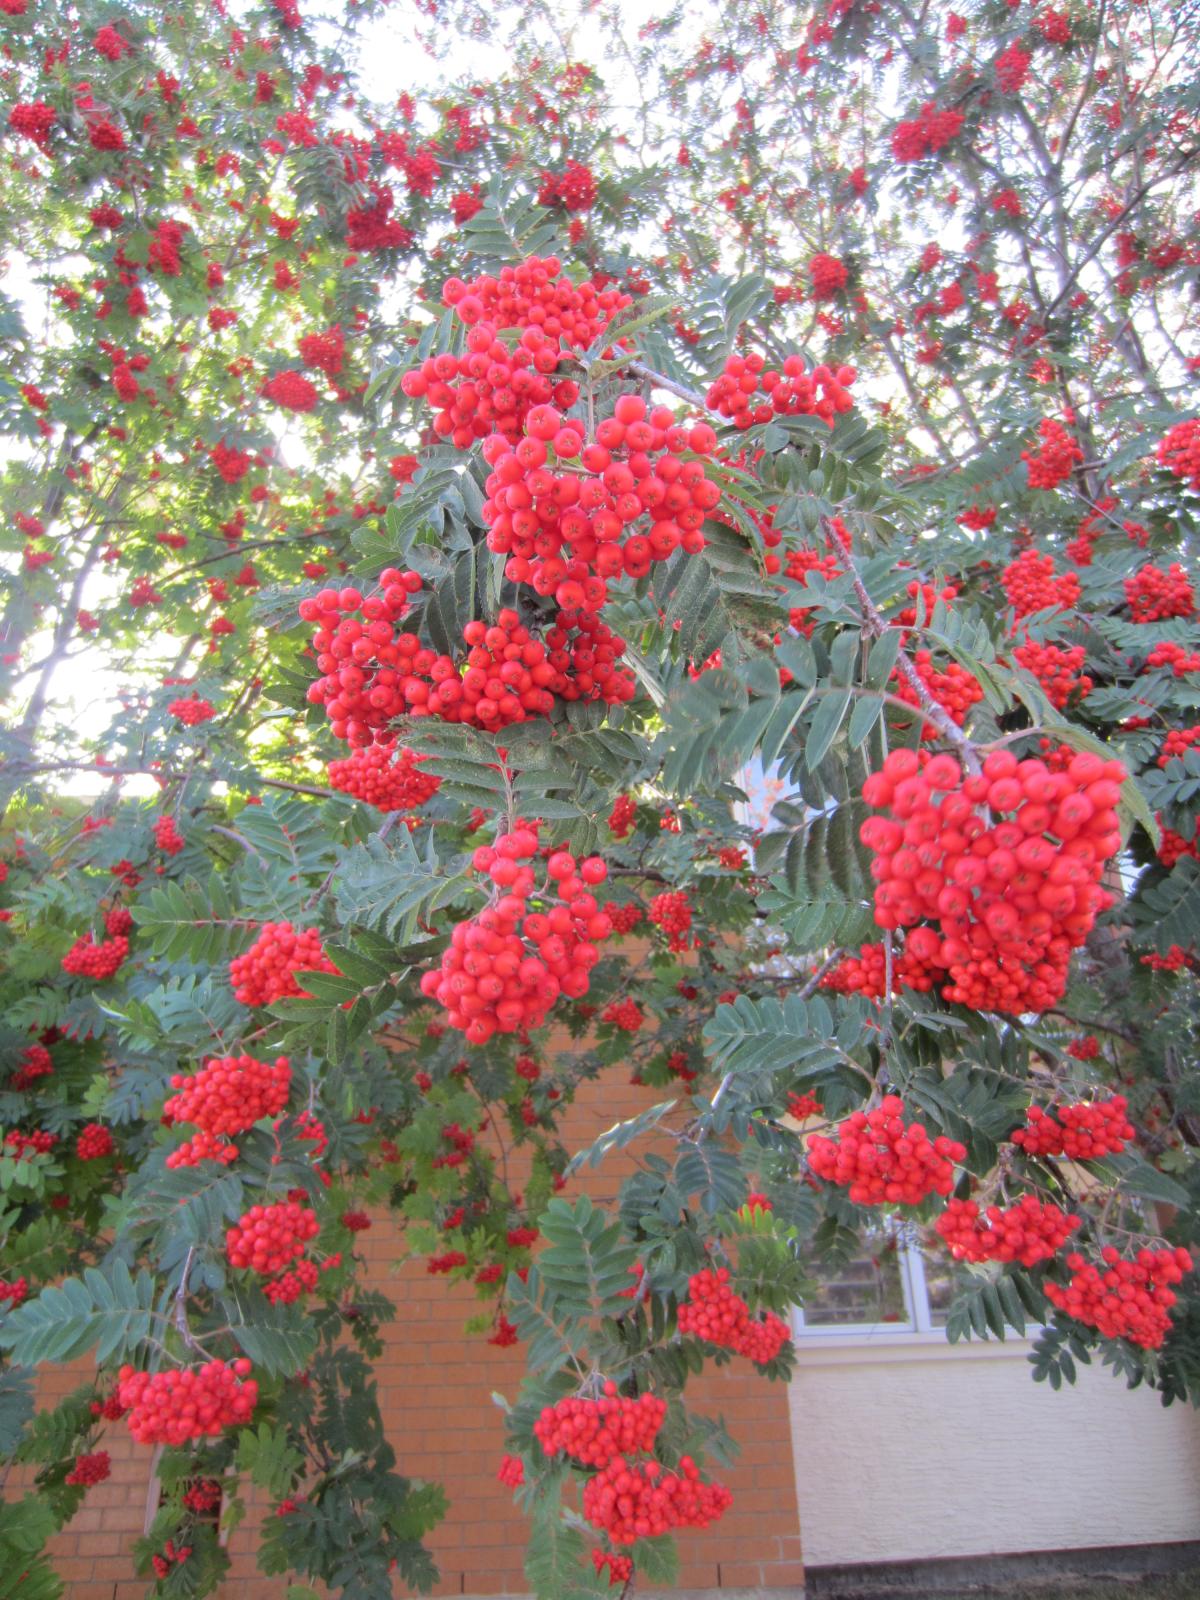 Tree with large leaves made up of small leaflets as well as large bunches of vibrant red berries